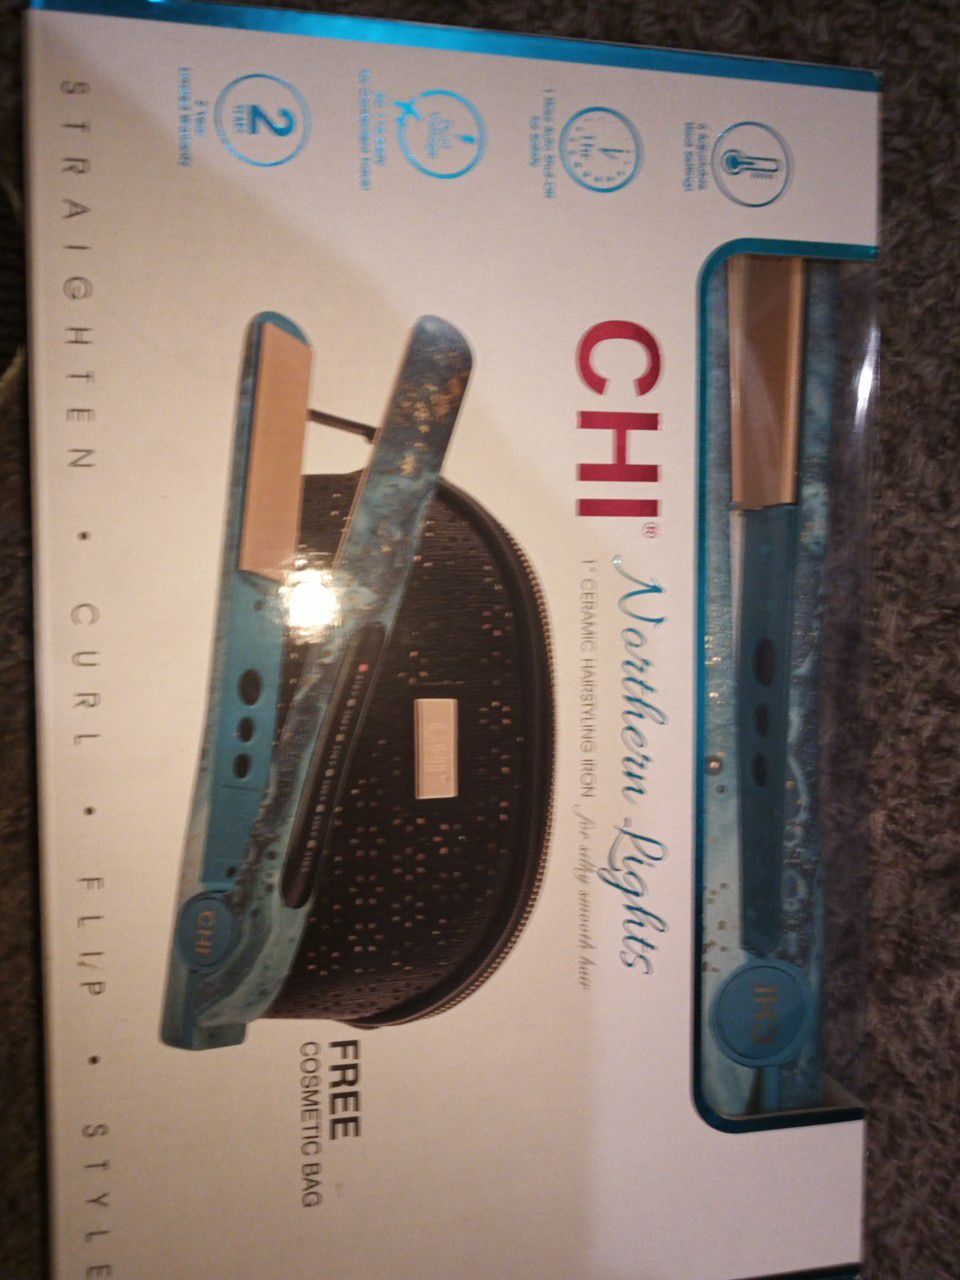 CHI northern lights 1 inch ceramic hairstyling iron for silky smooth hair free cosmetic bag straighten curls flip flop style